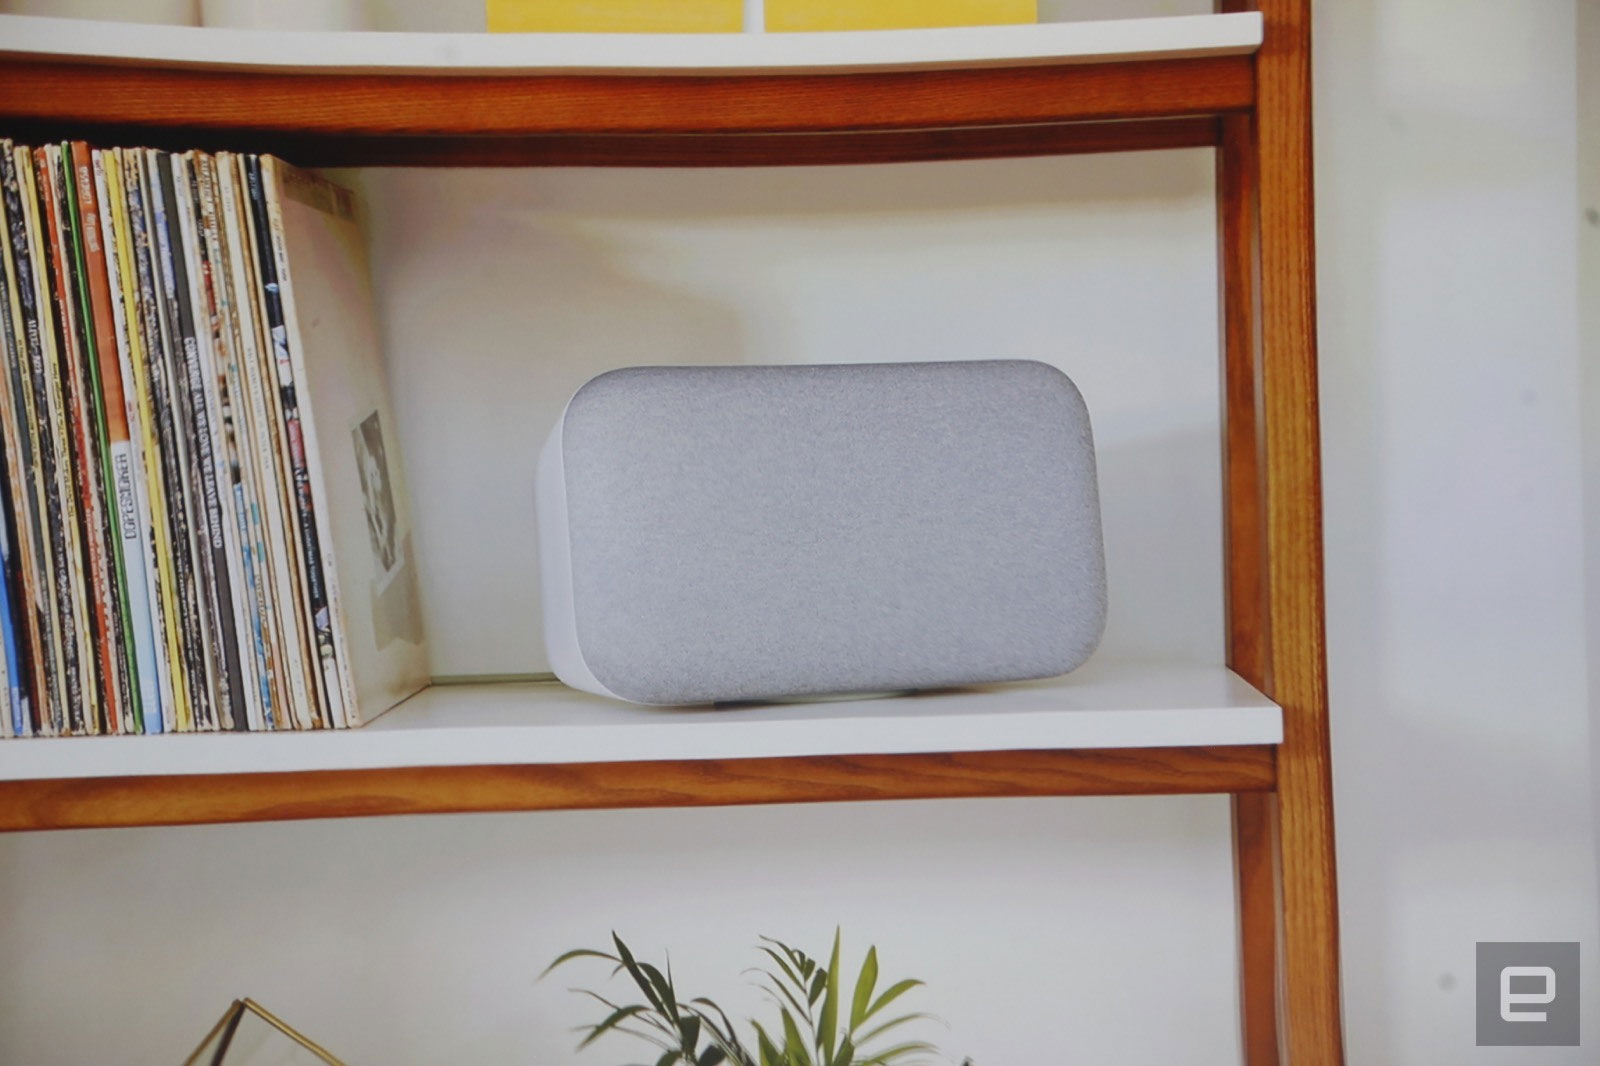 Smart speakers are working their way into every home